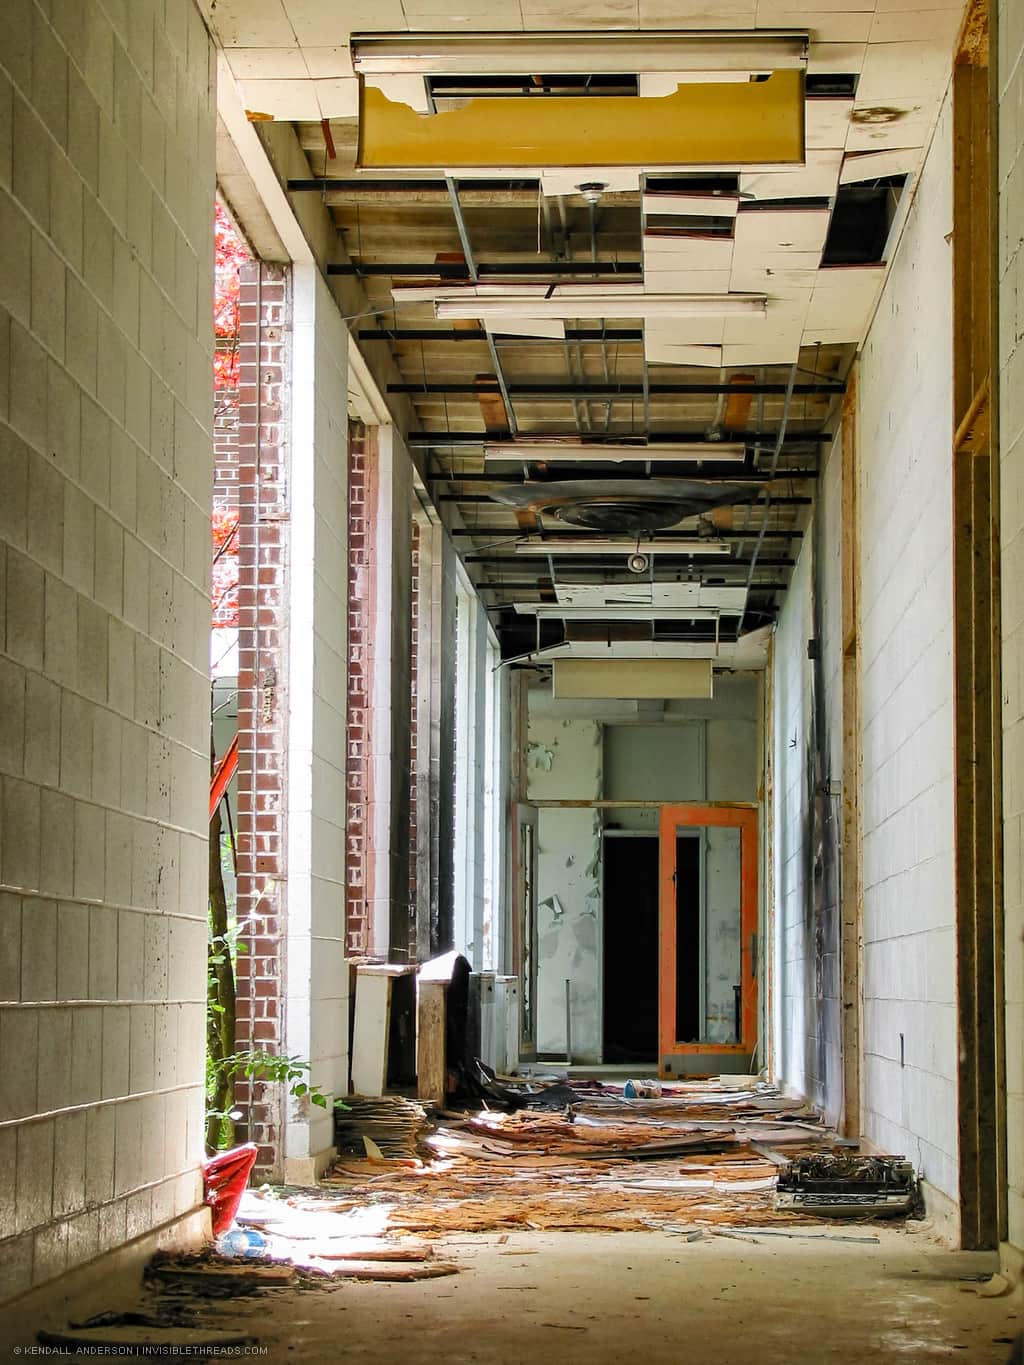 A long hallway filled with debris is brightly lit. All windows to an interior courtyard are broken, and the exit doors are missing all their glass.